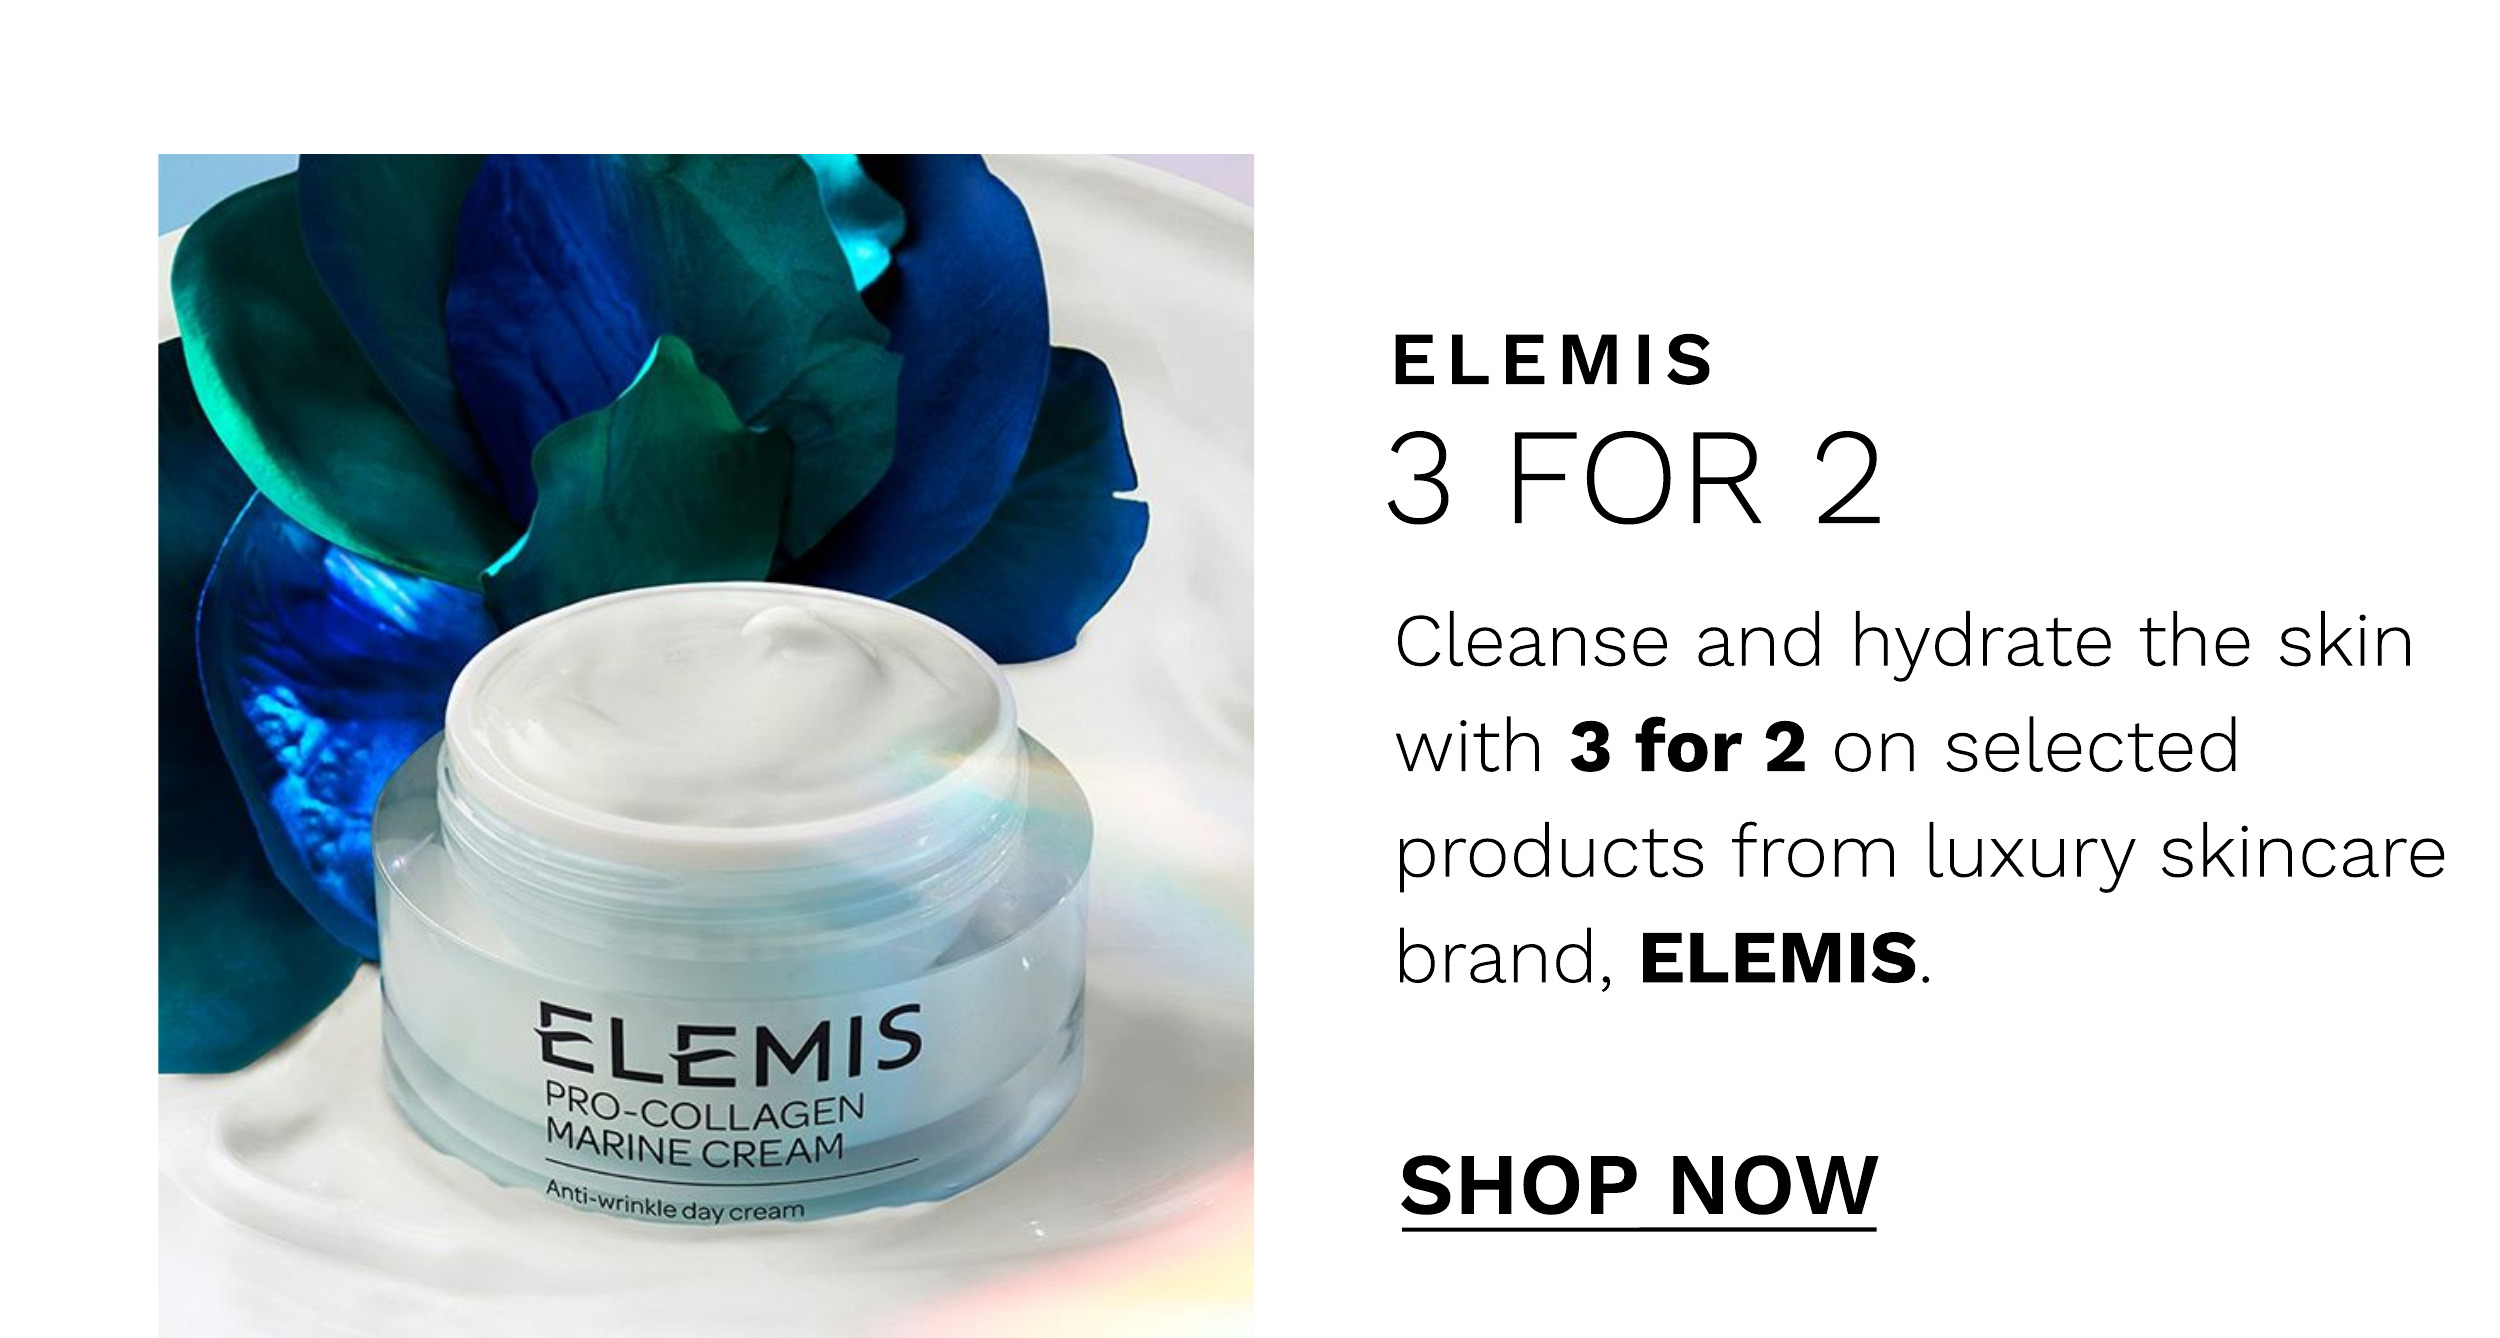  ELEMIS 3 FOR 2 Cleanse and hydrate the skin with 3 for 2 on selected products from luxury skincare brand, ELEMIS. SHOP NOW 